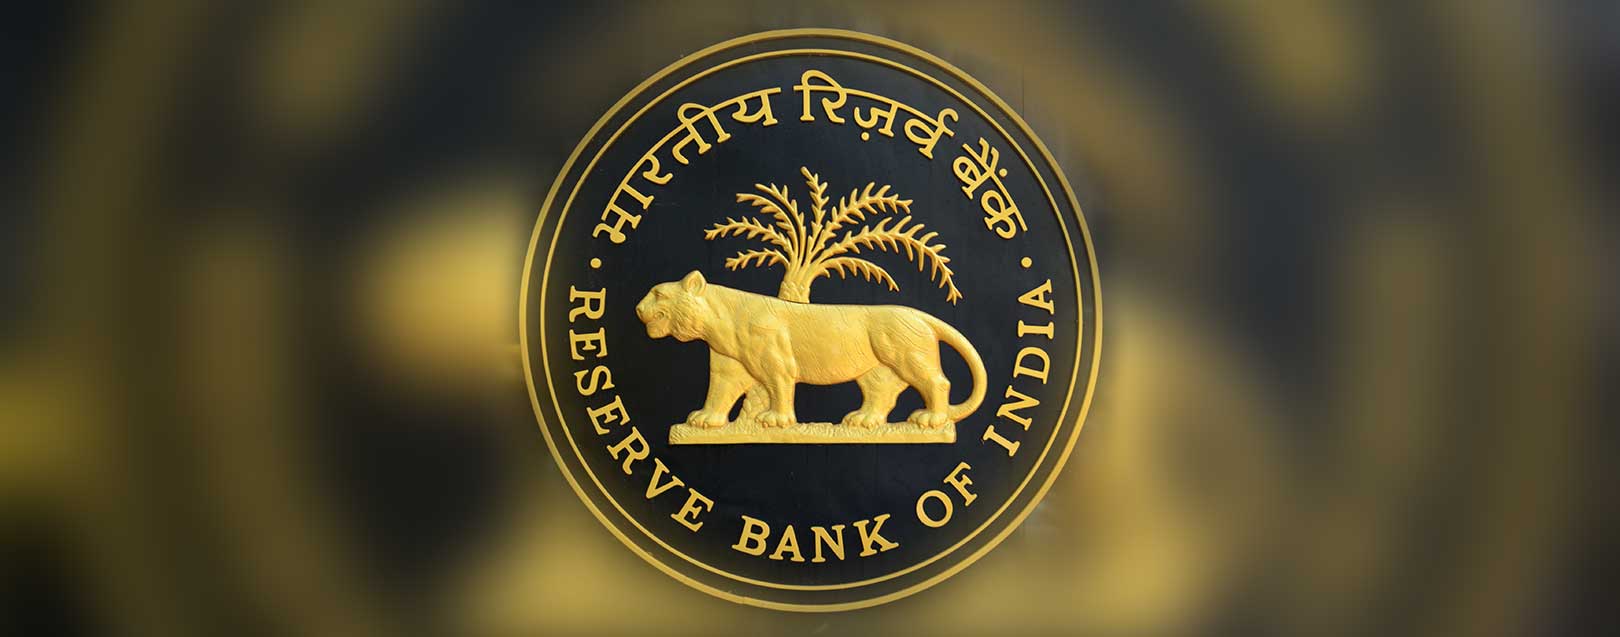 RBI releases Vision-2018 to ease payment systems